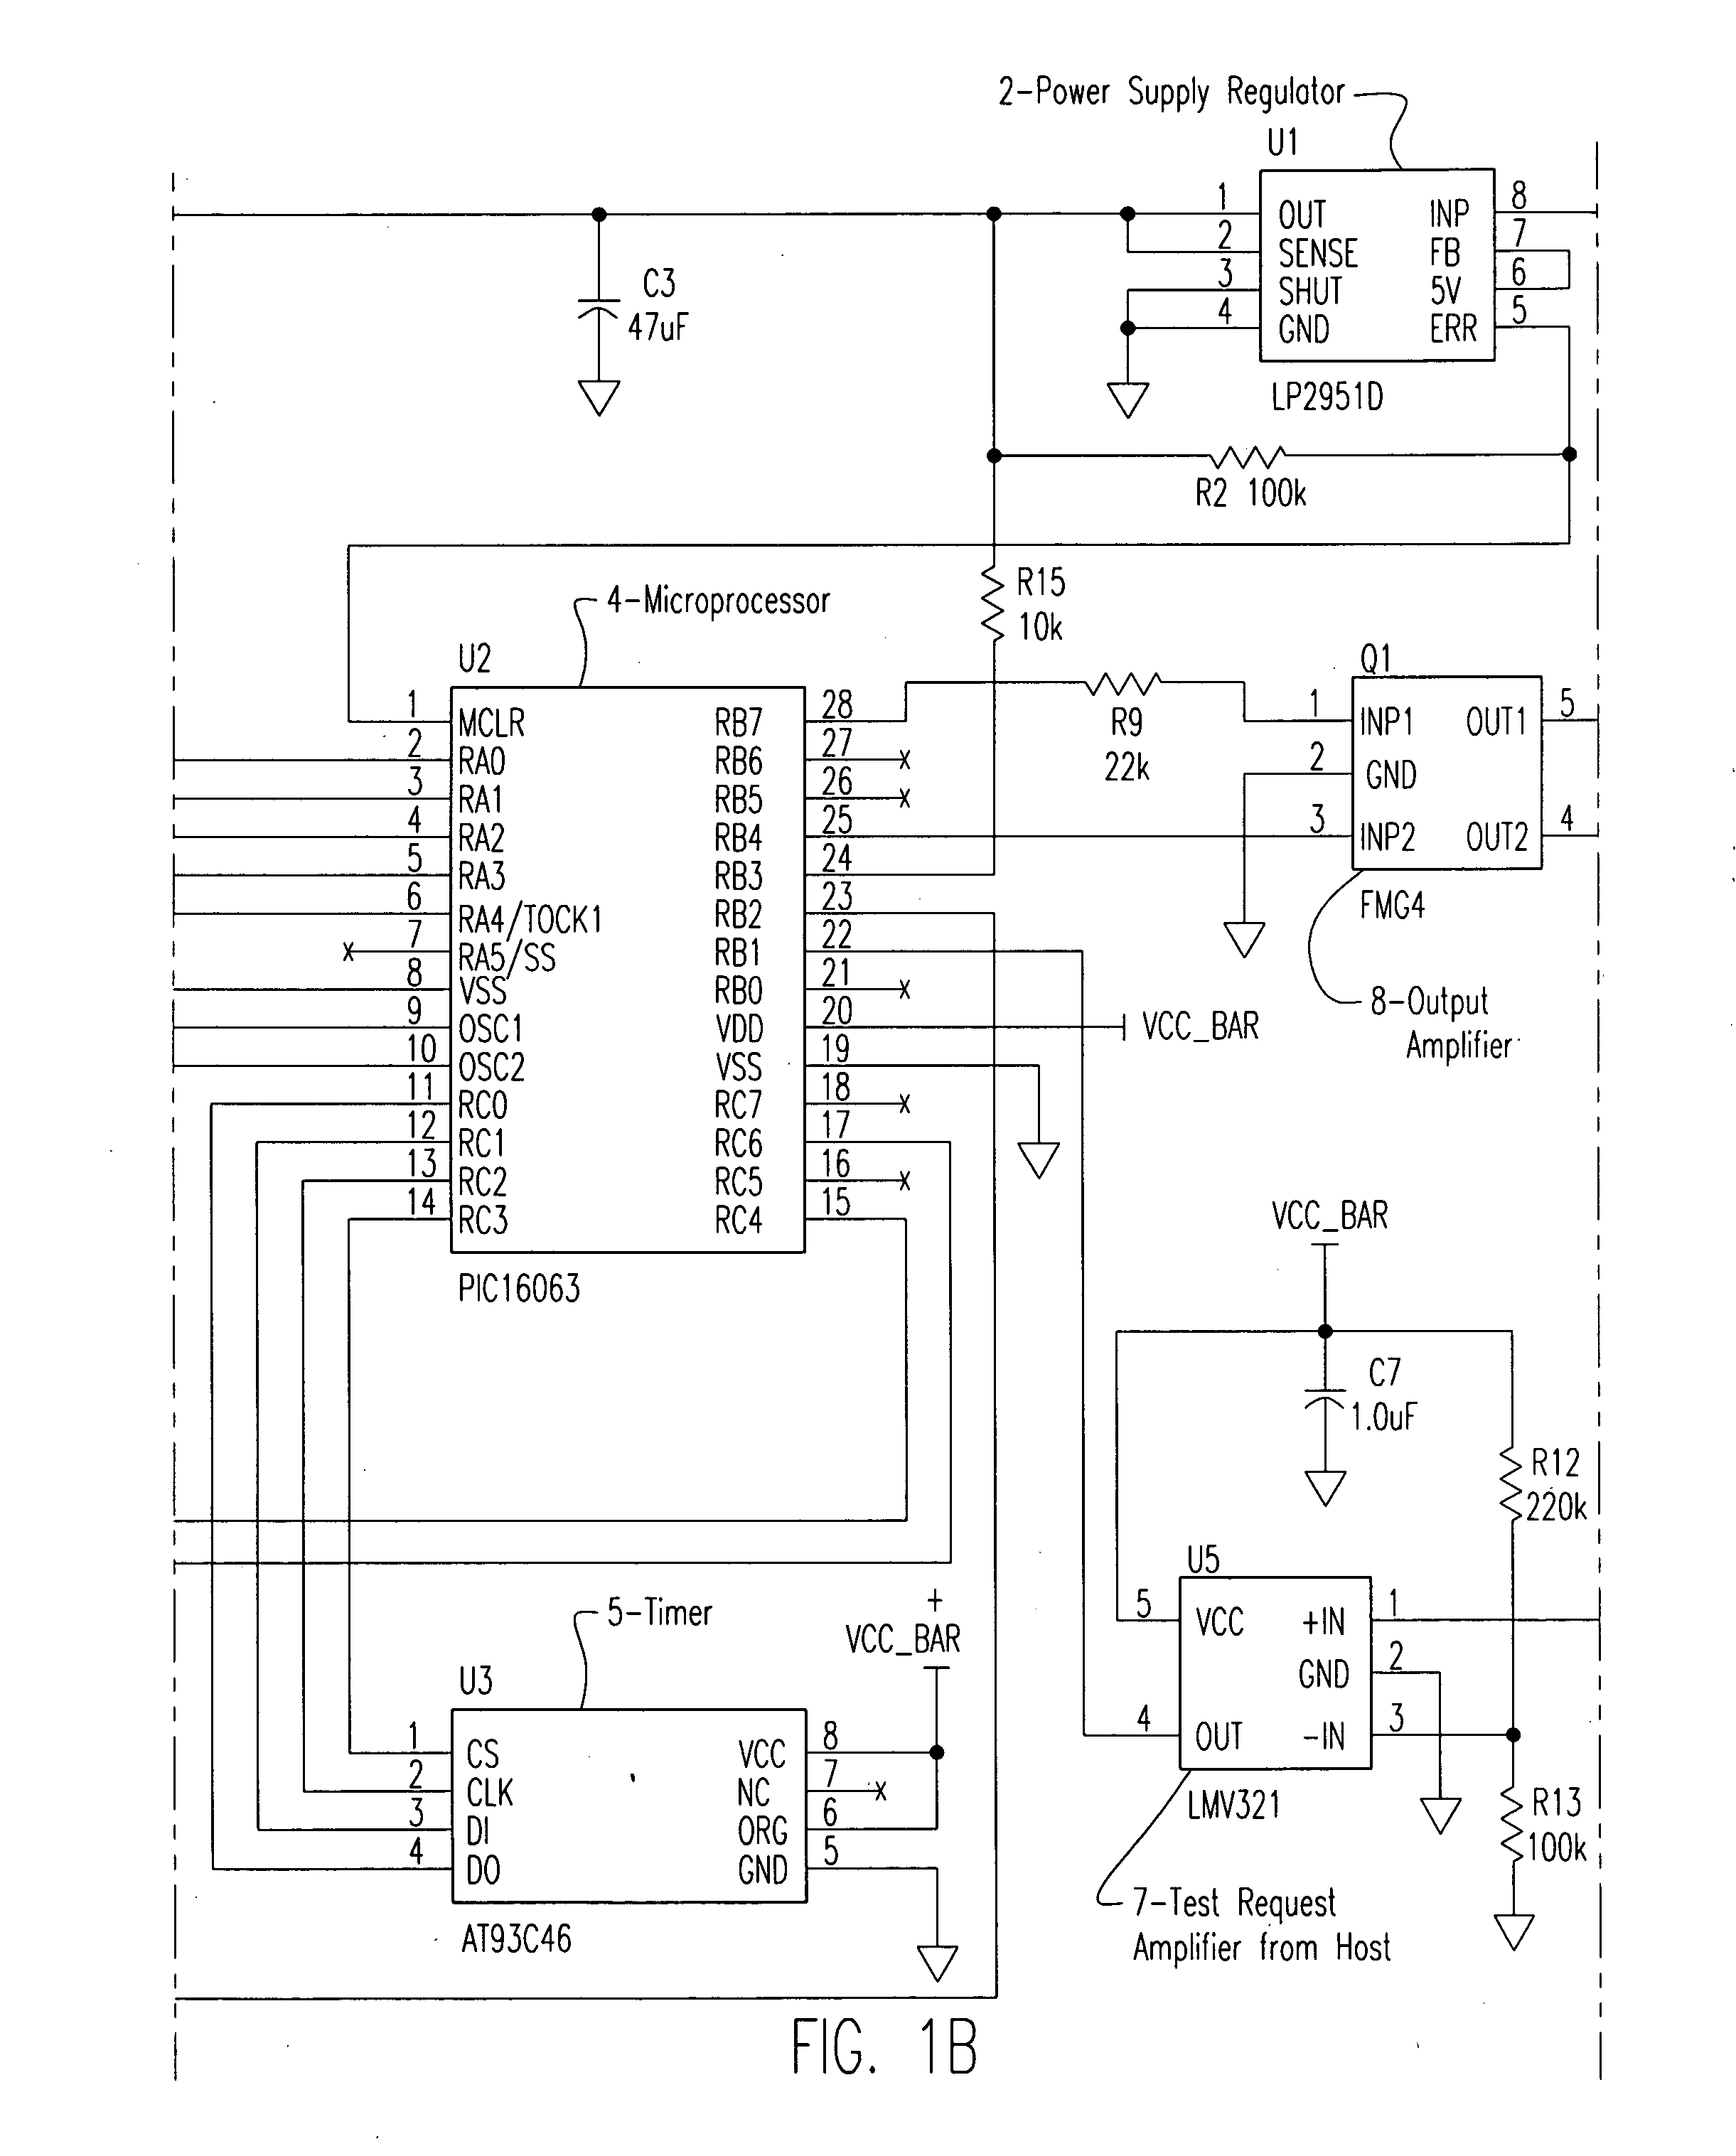 Method of an apparatus for sensing the unauthorized movement of vehicles and the like and generating an alarm or warning of vehicle theft